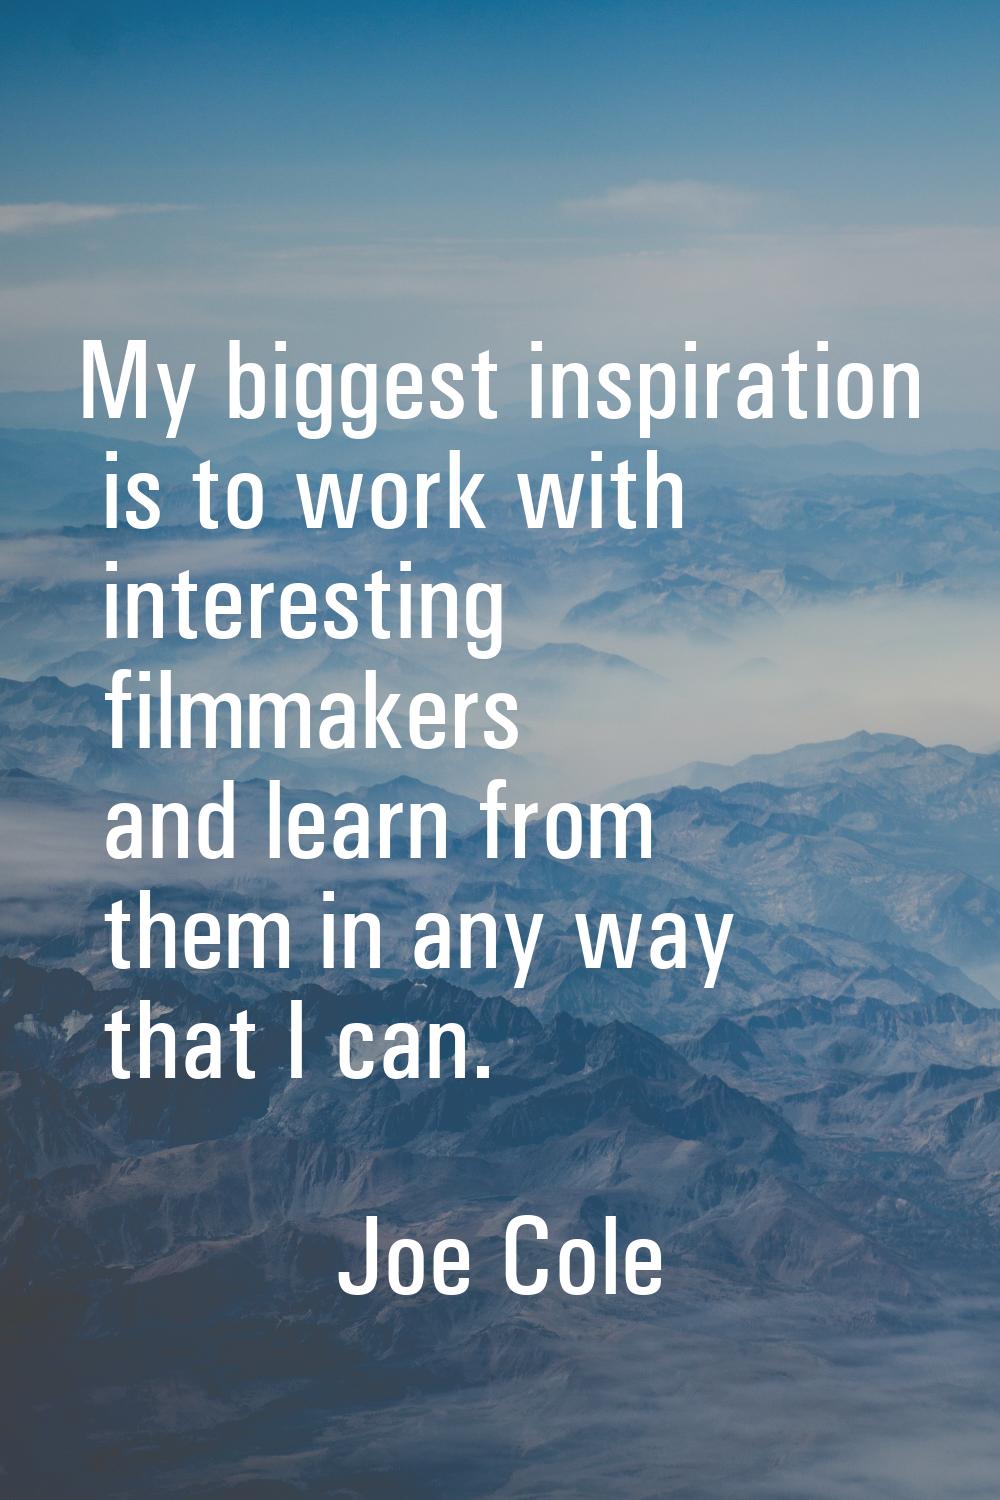 My biggest inspiration is to work with interesting filmmakers and learn from them in any way that I